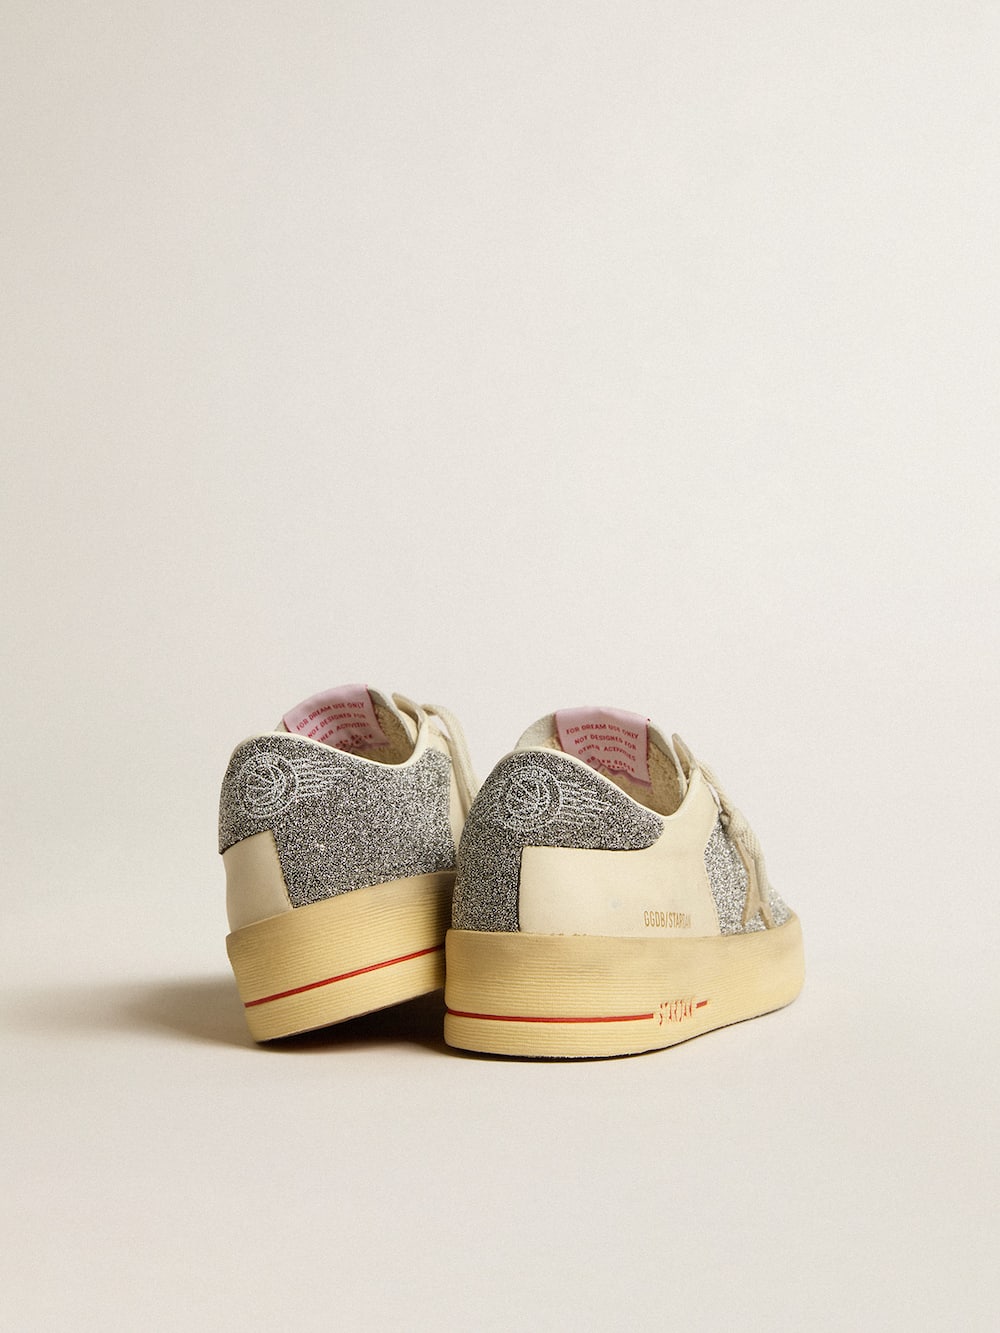 Golden Goose - Women's Stardan in suede with sand star and silver Swarovski crystal inserts in 